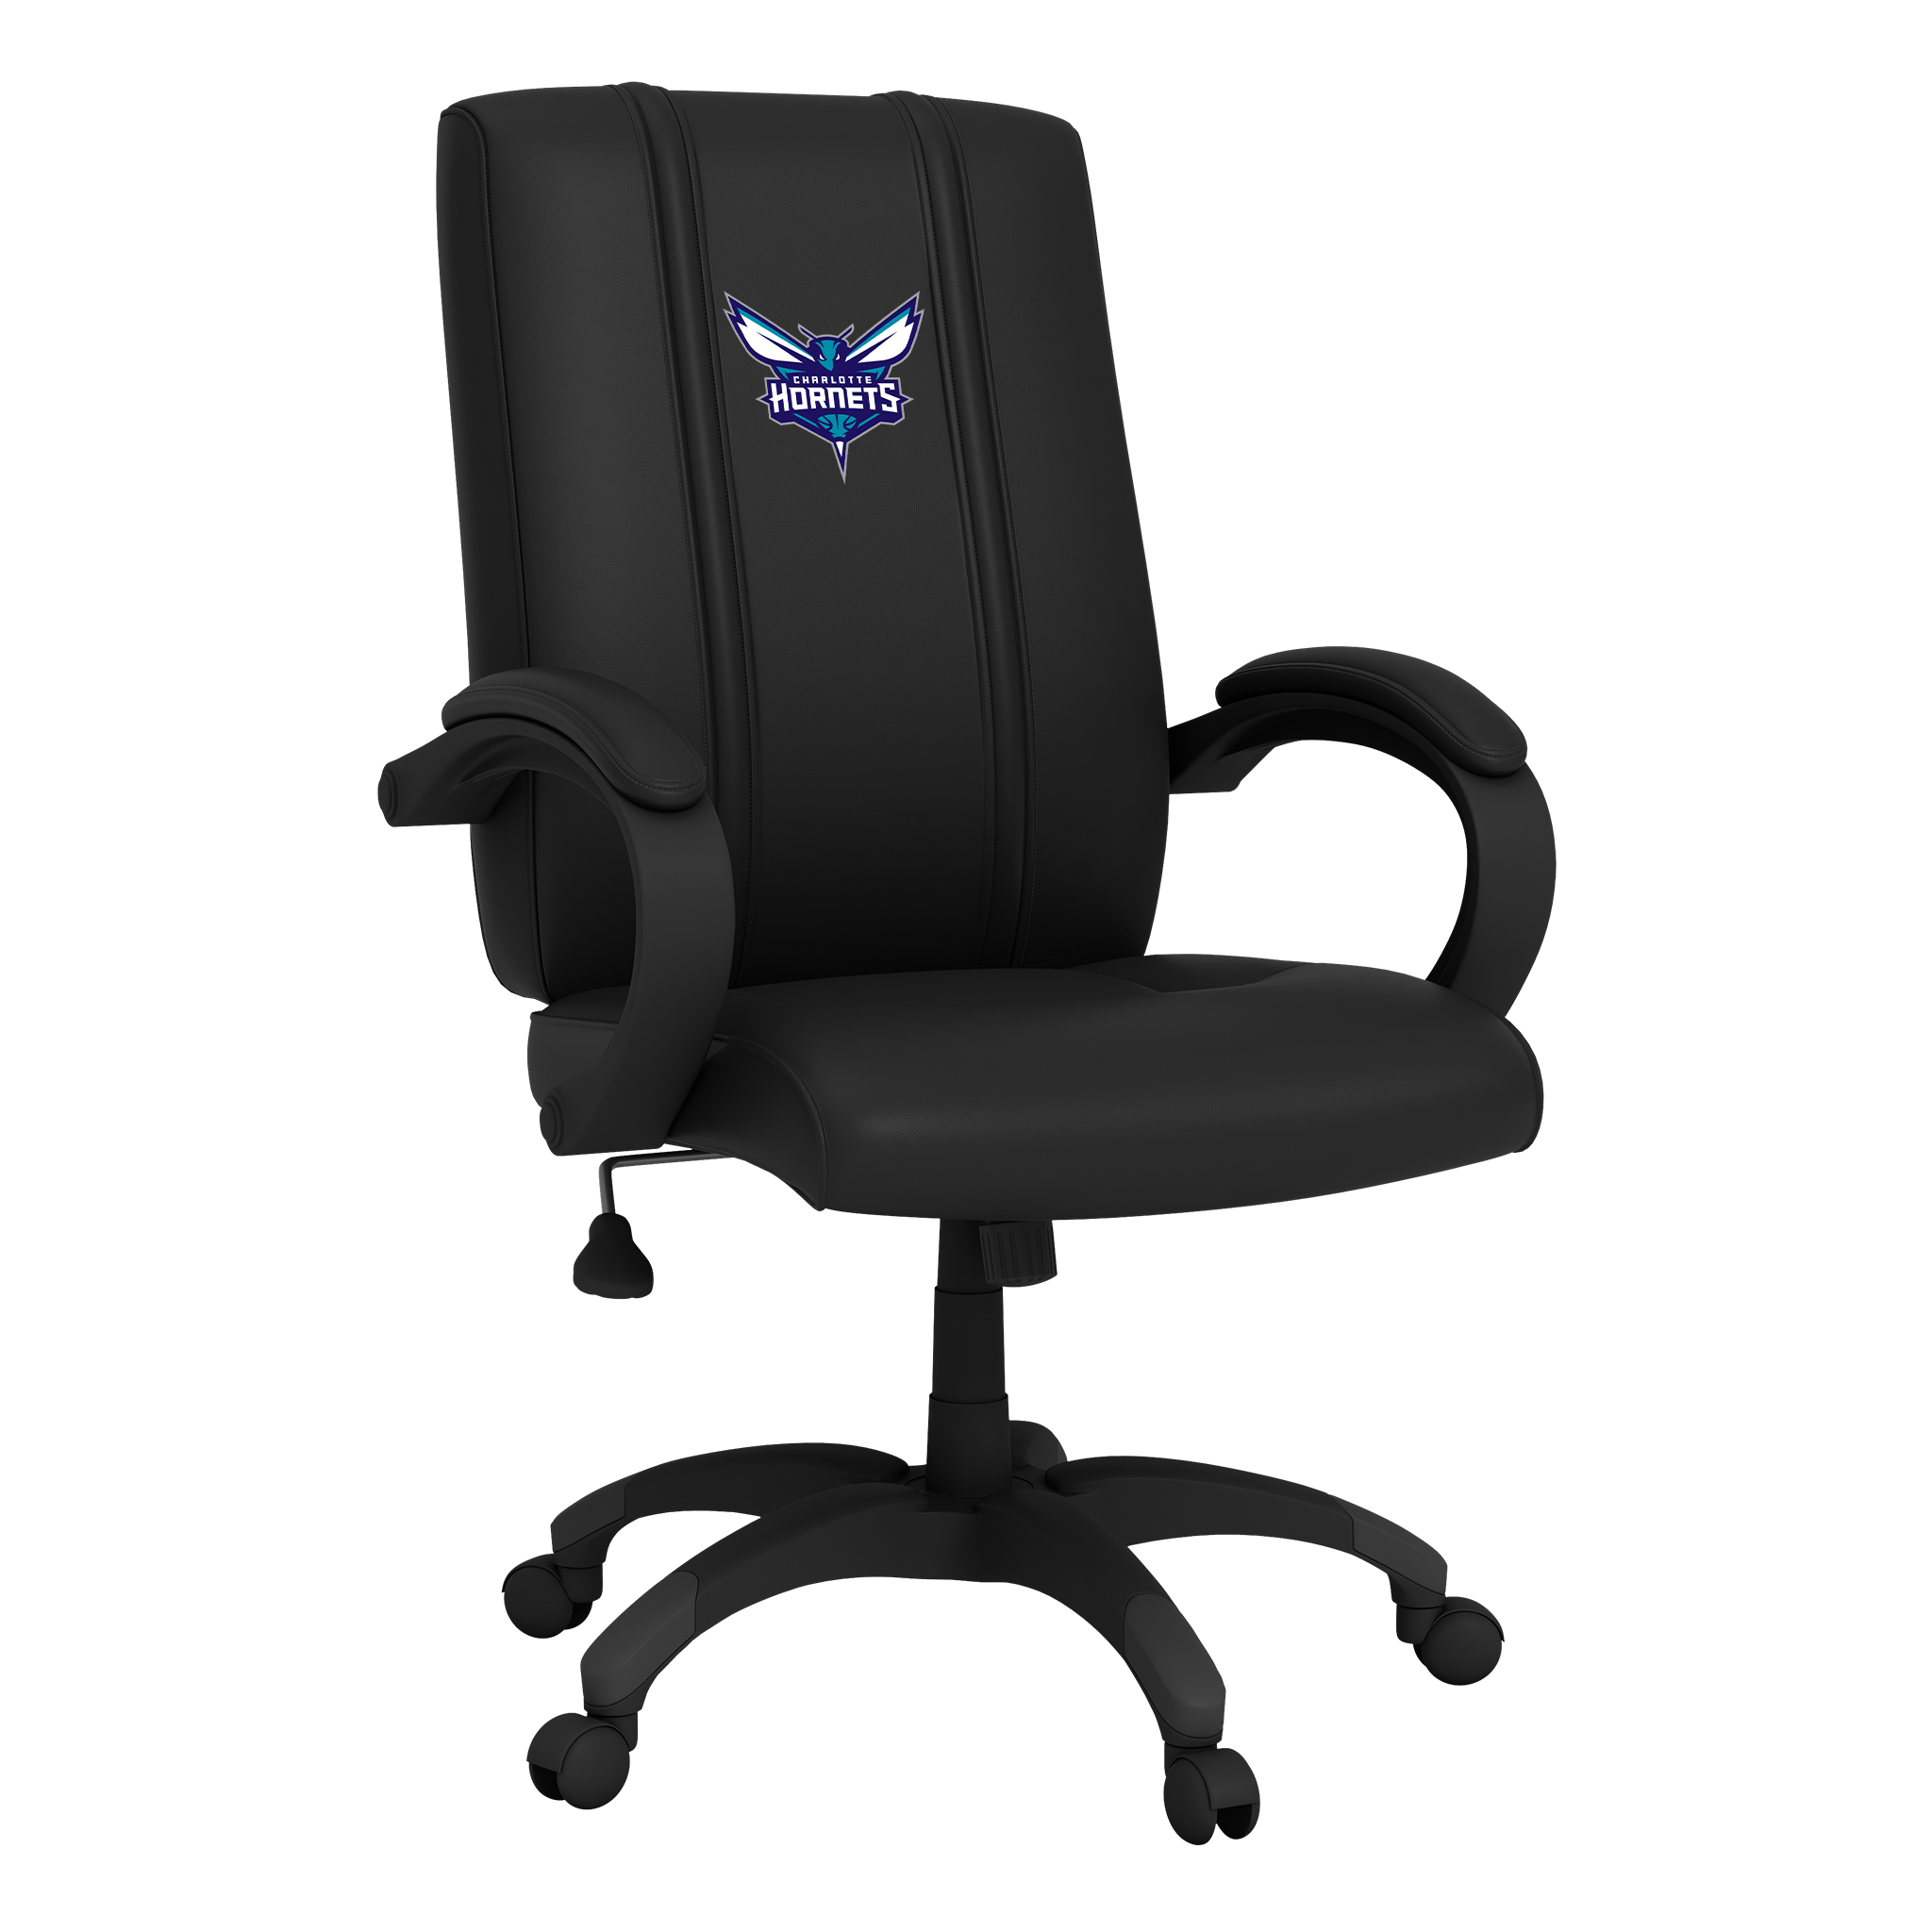 Charlotte Hornets Office Chair 1000 with Charlotte Hornets Primary